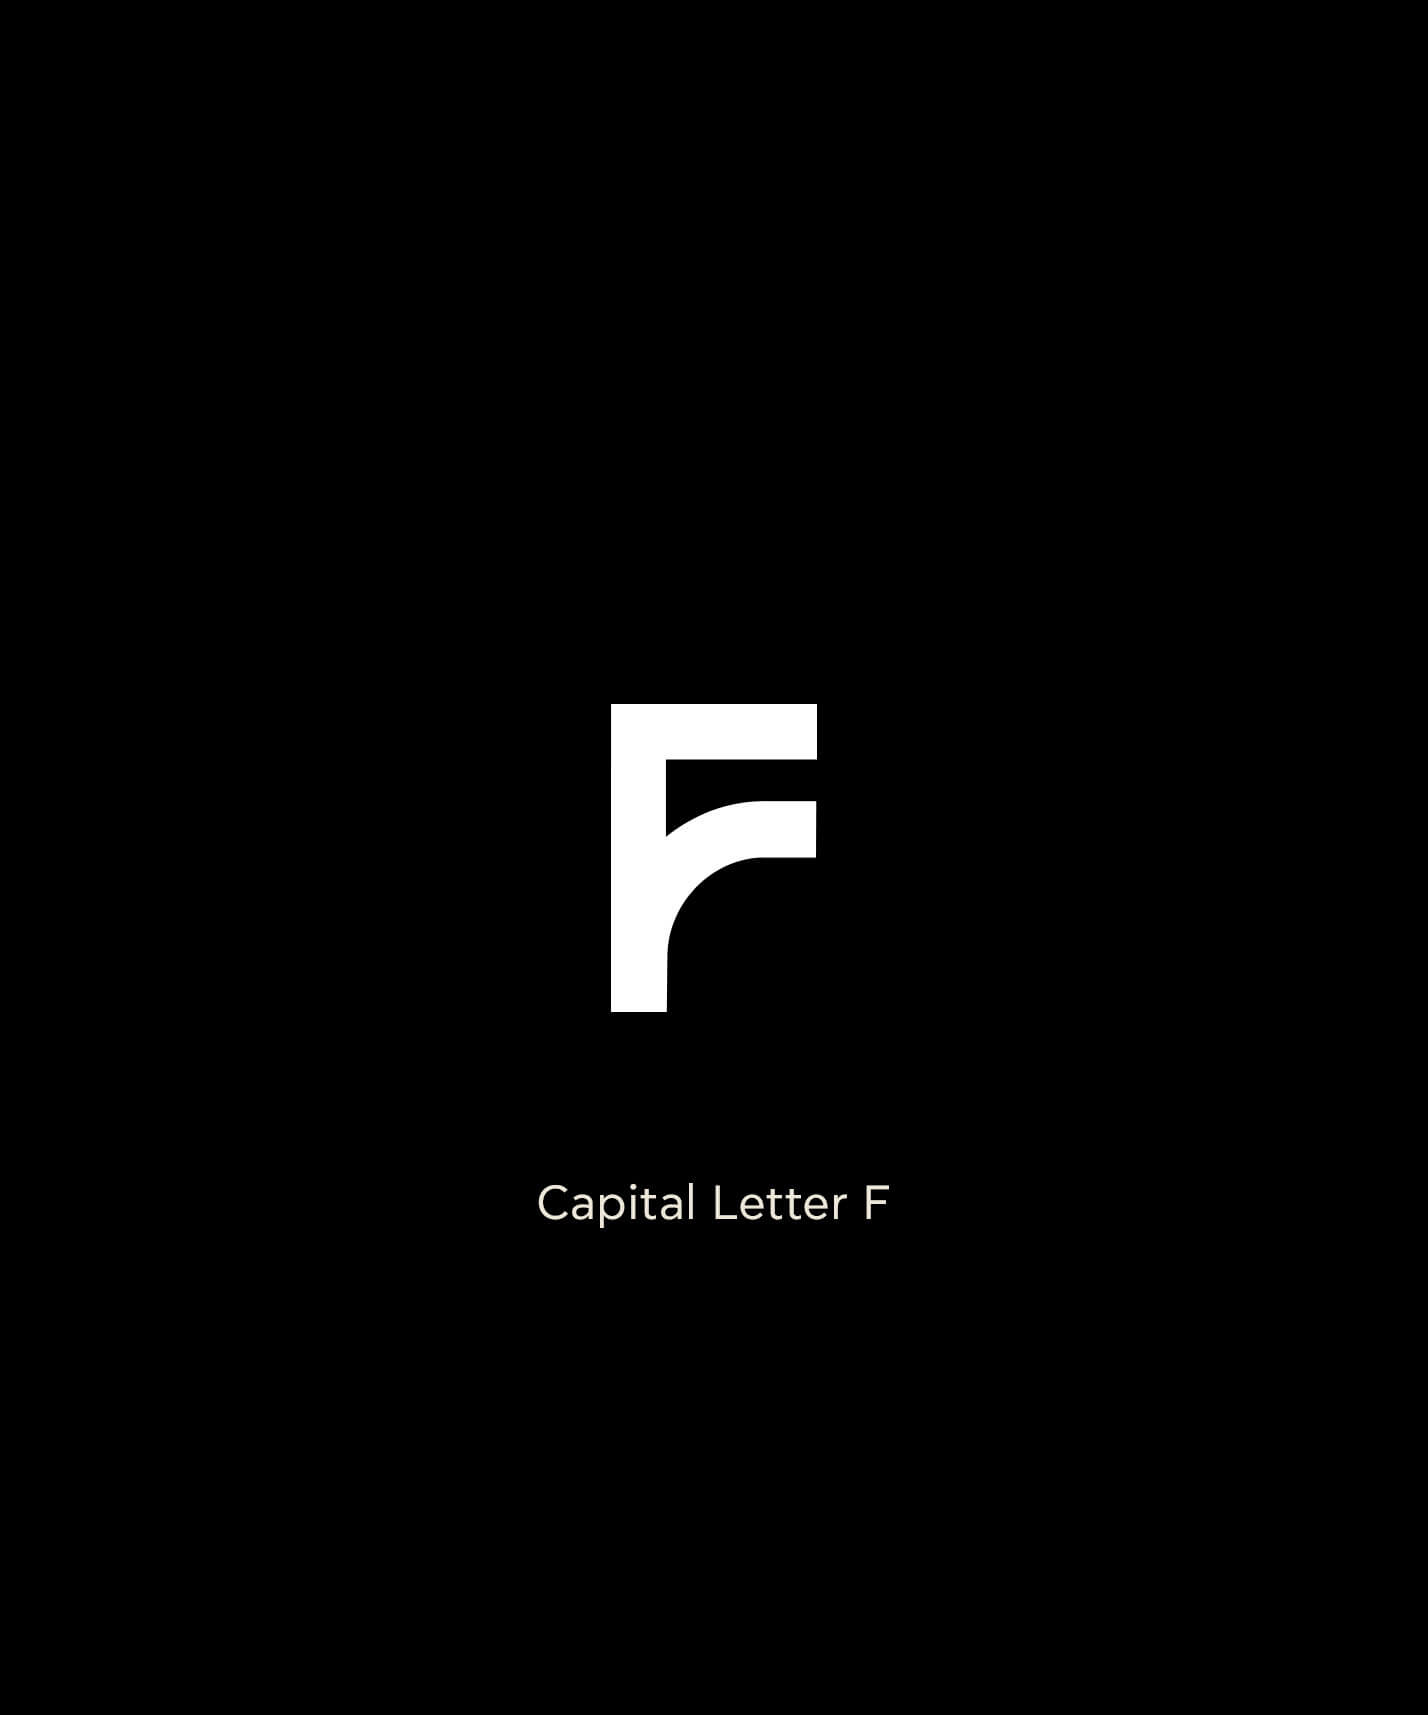 Initial Letter F Logo Inspiration Moodboard Capital Letter